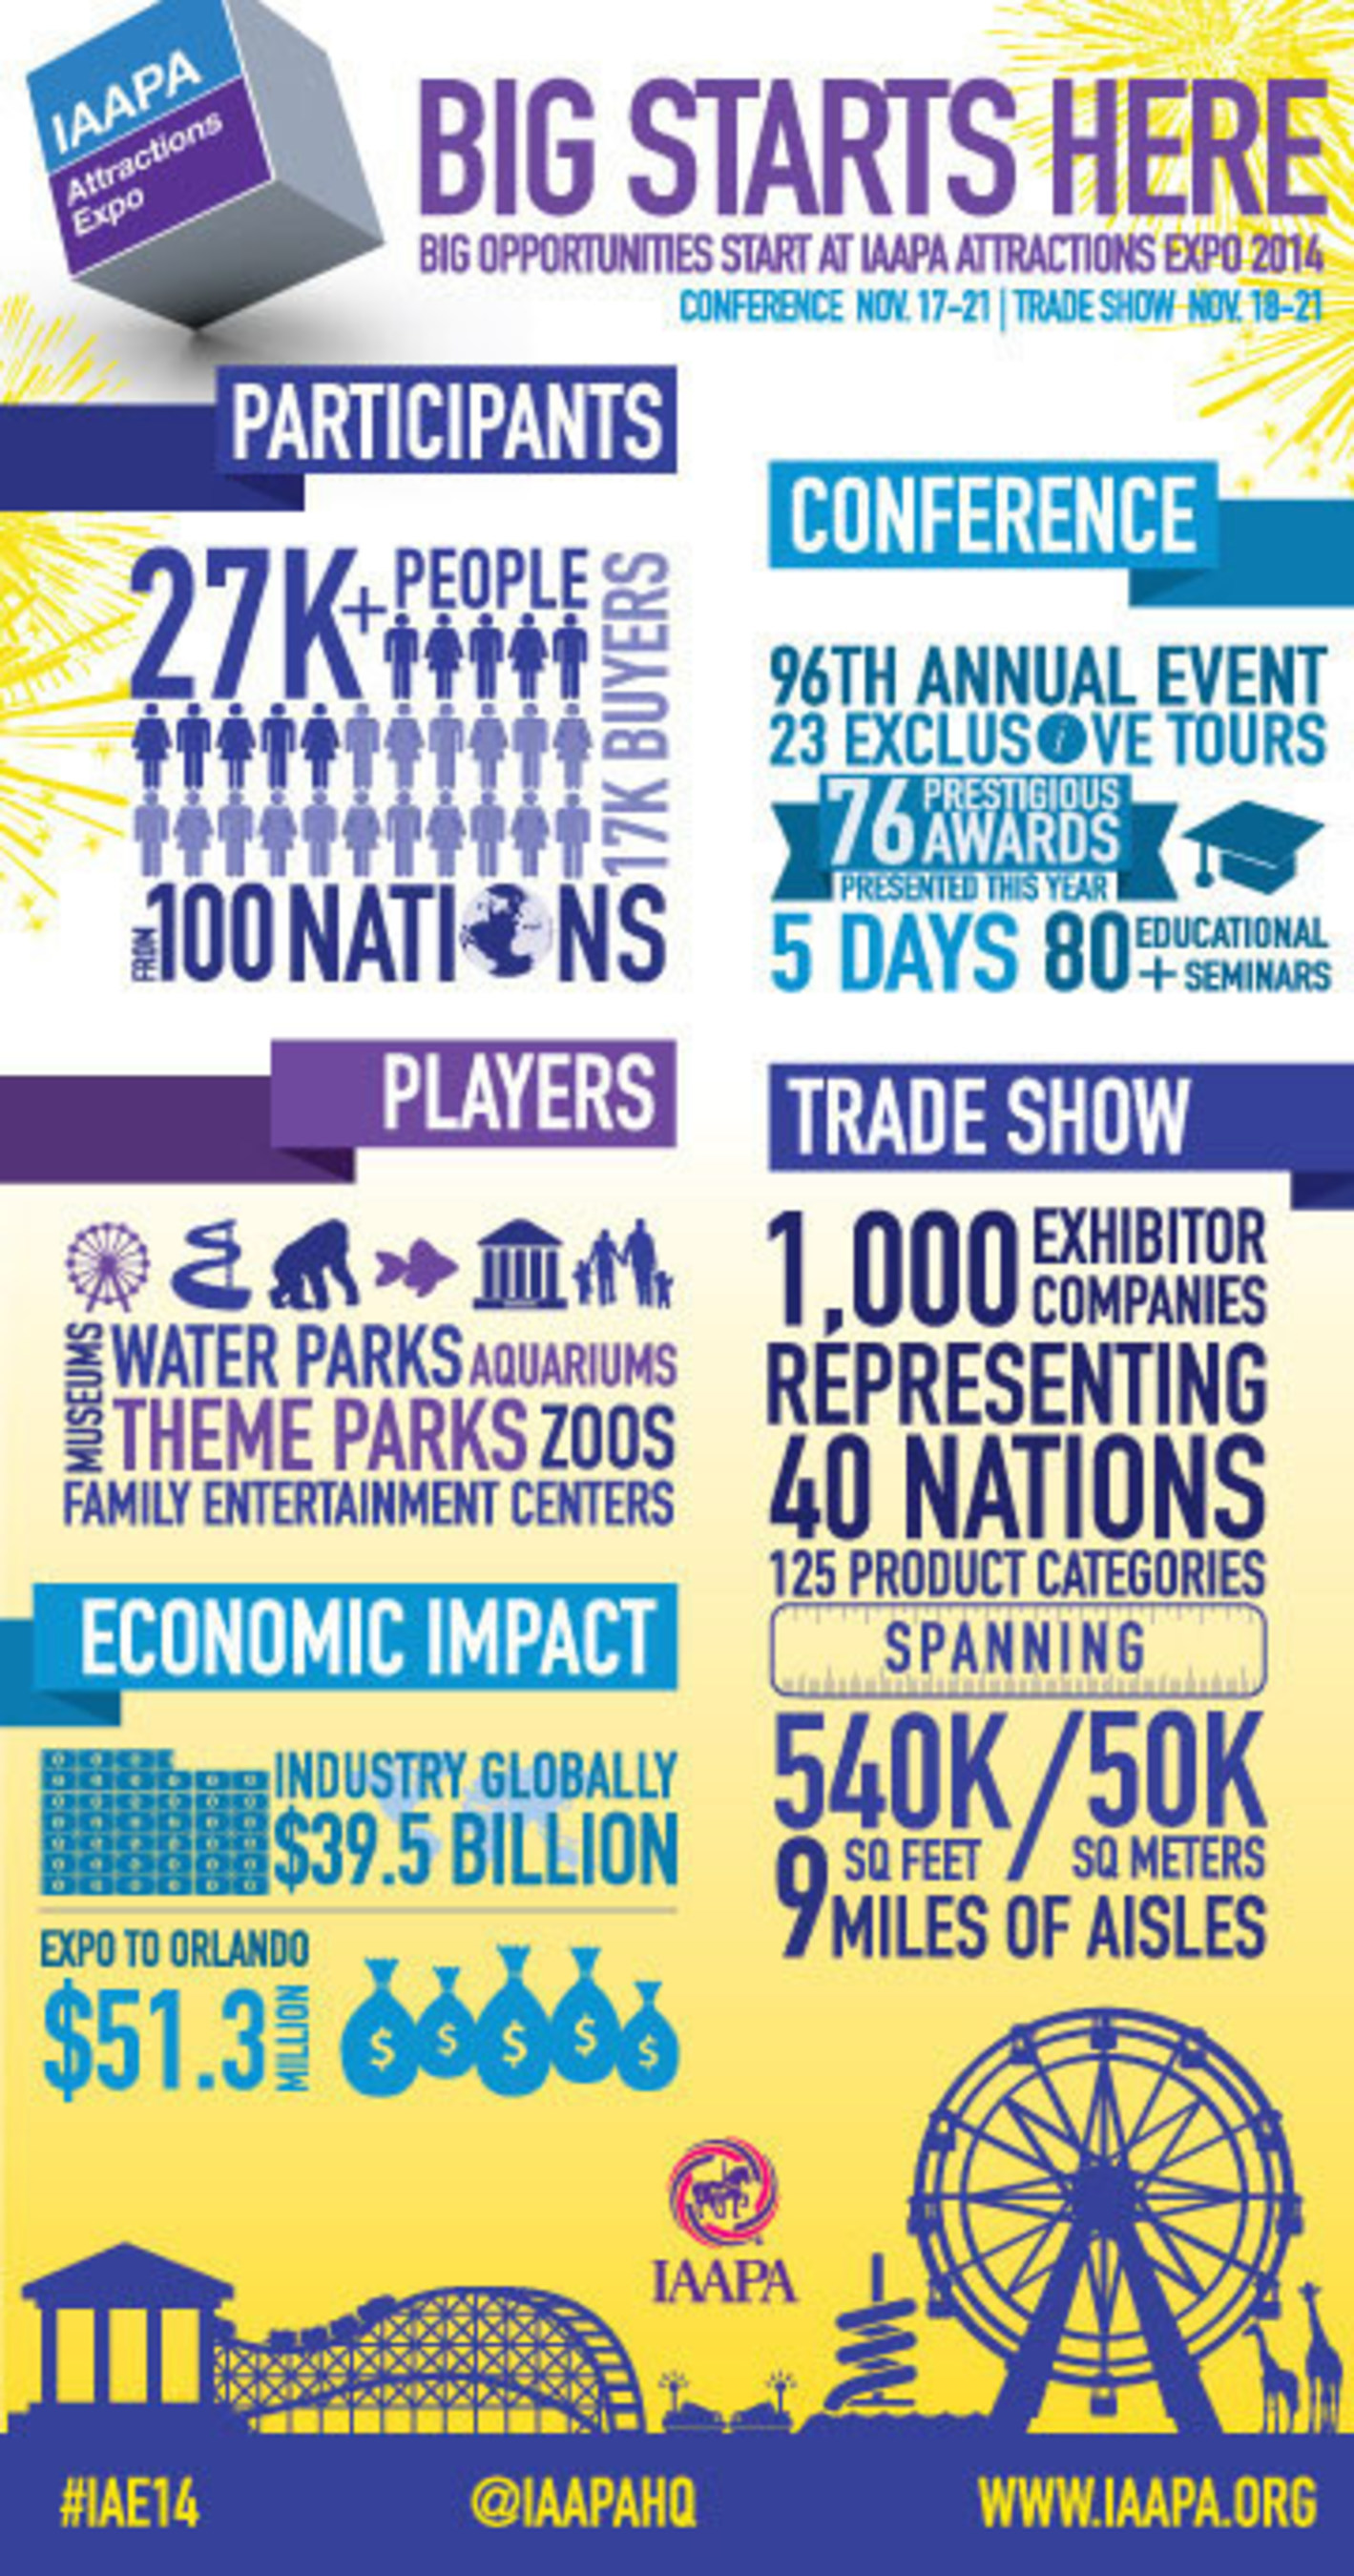 IAAPA Attractions Expo 2014 is open through Nov. 21 in Orlando; Check out the BIG stats on the largest annual gathering of the $39.5 billion global theme park and attractions industry. Image via IAAPA.org at http://bit.ly/1xdrFA7.